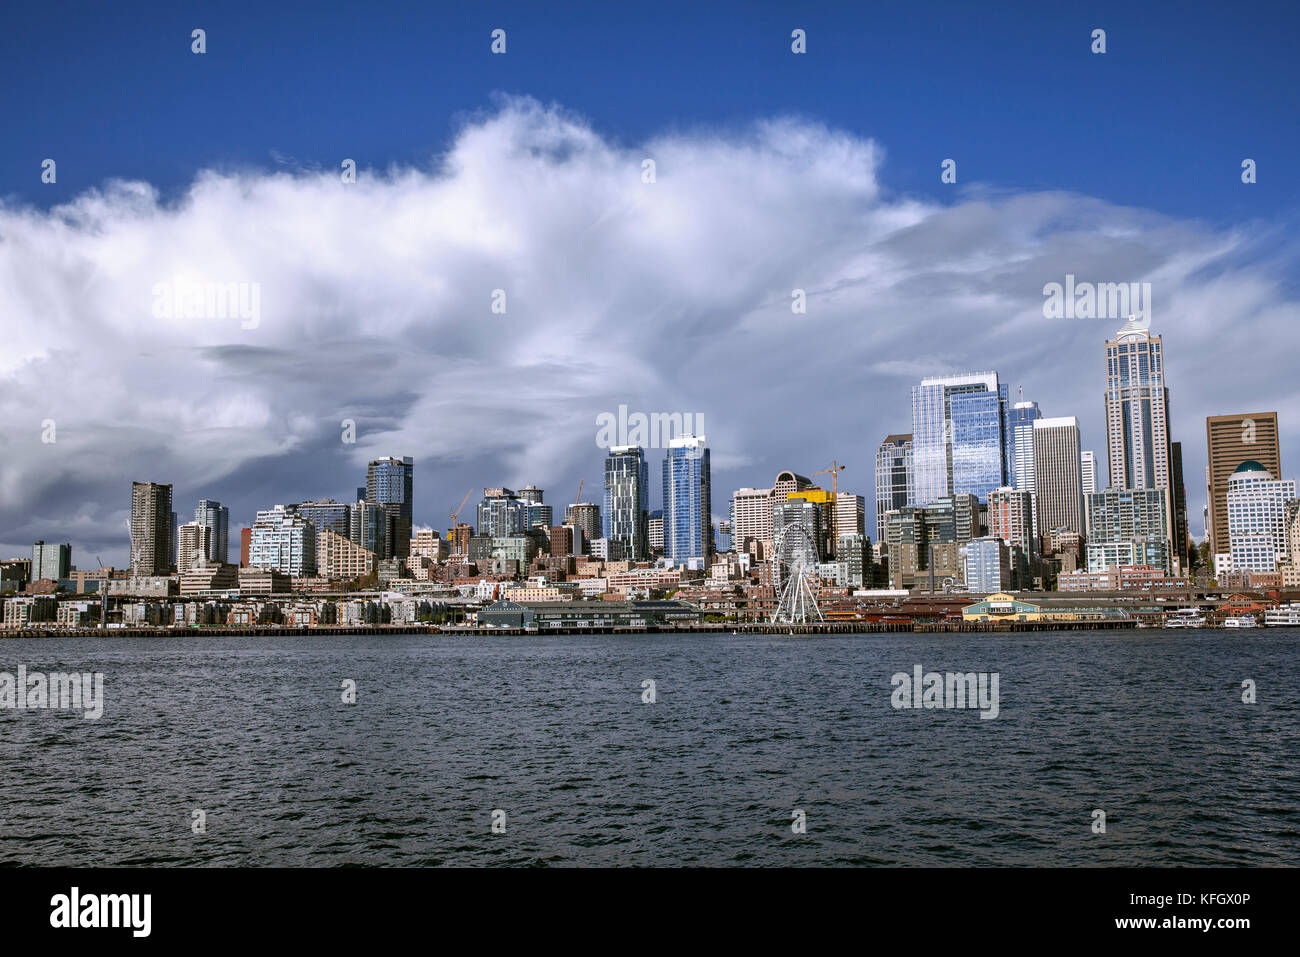 WA14050-00...WASHINGTON - Down town Seattle viewed from the deck of the Seattle to Bremerton Ferry. Stock Photo